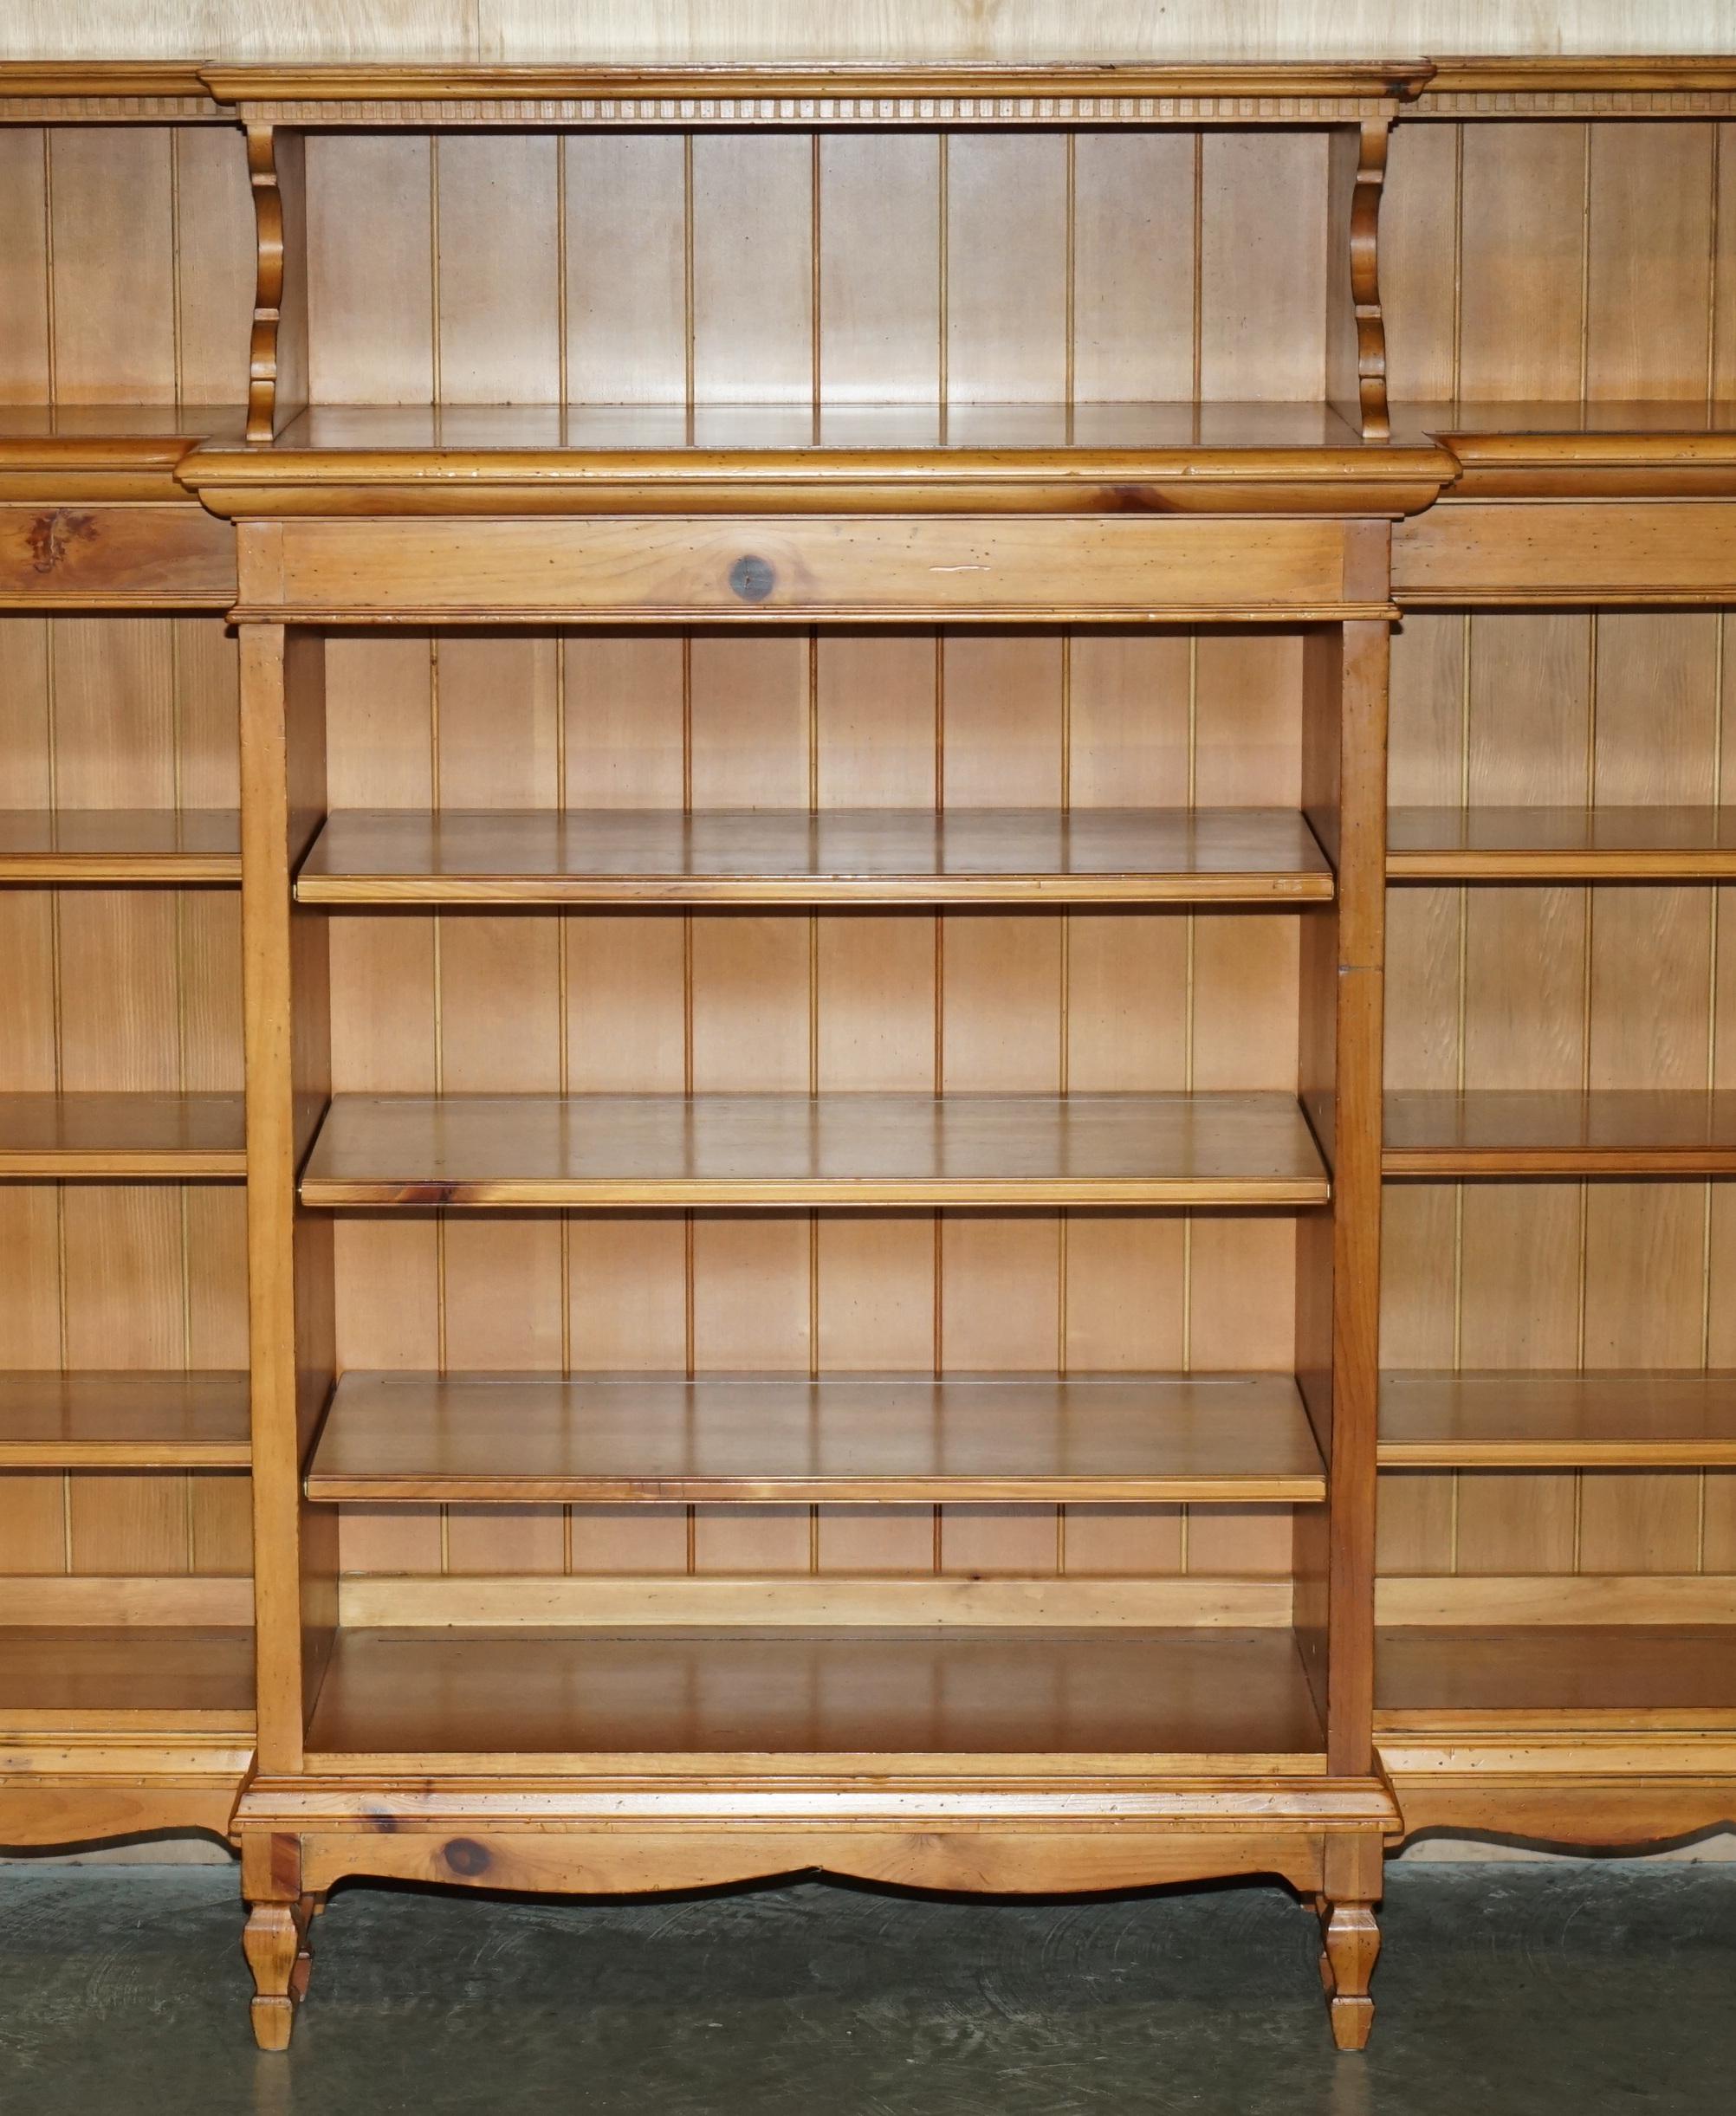 Victorian EXTRA LARGE RALPH LAUREN 1.7 METER TALL 2.4 METER WiDE OPEN OAK LIBRARY BOOKCASE For Sale